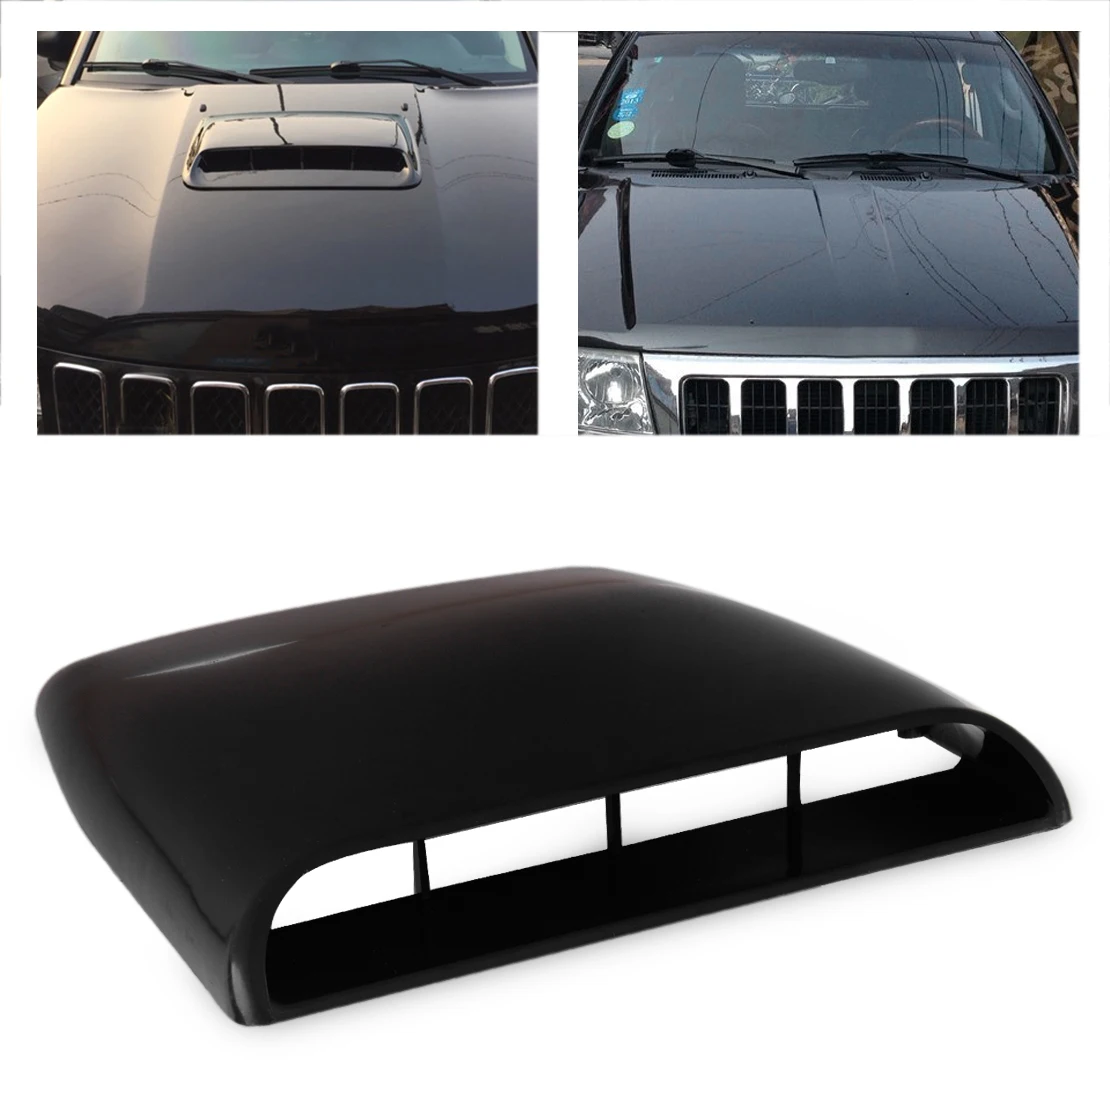 CITALL Black / White / Grey 1pc Car Universal 4x4 Air Flow Intake Hood Scoop Vent Bonnet Decorative Cover Decal